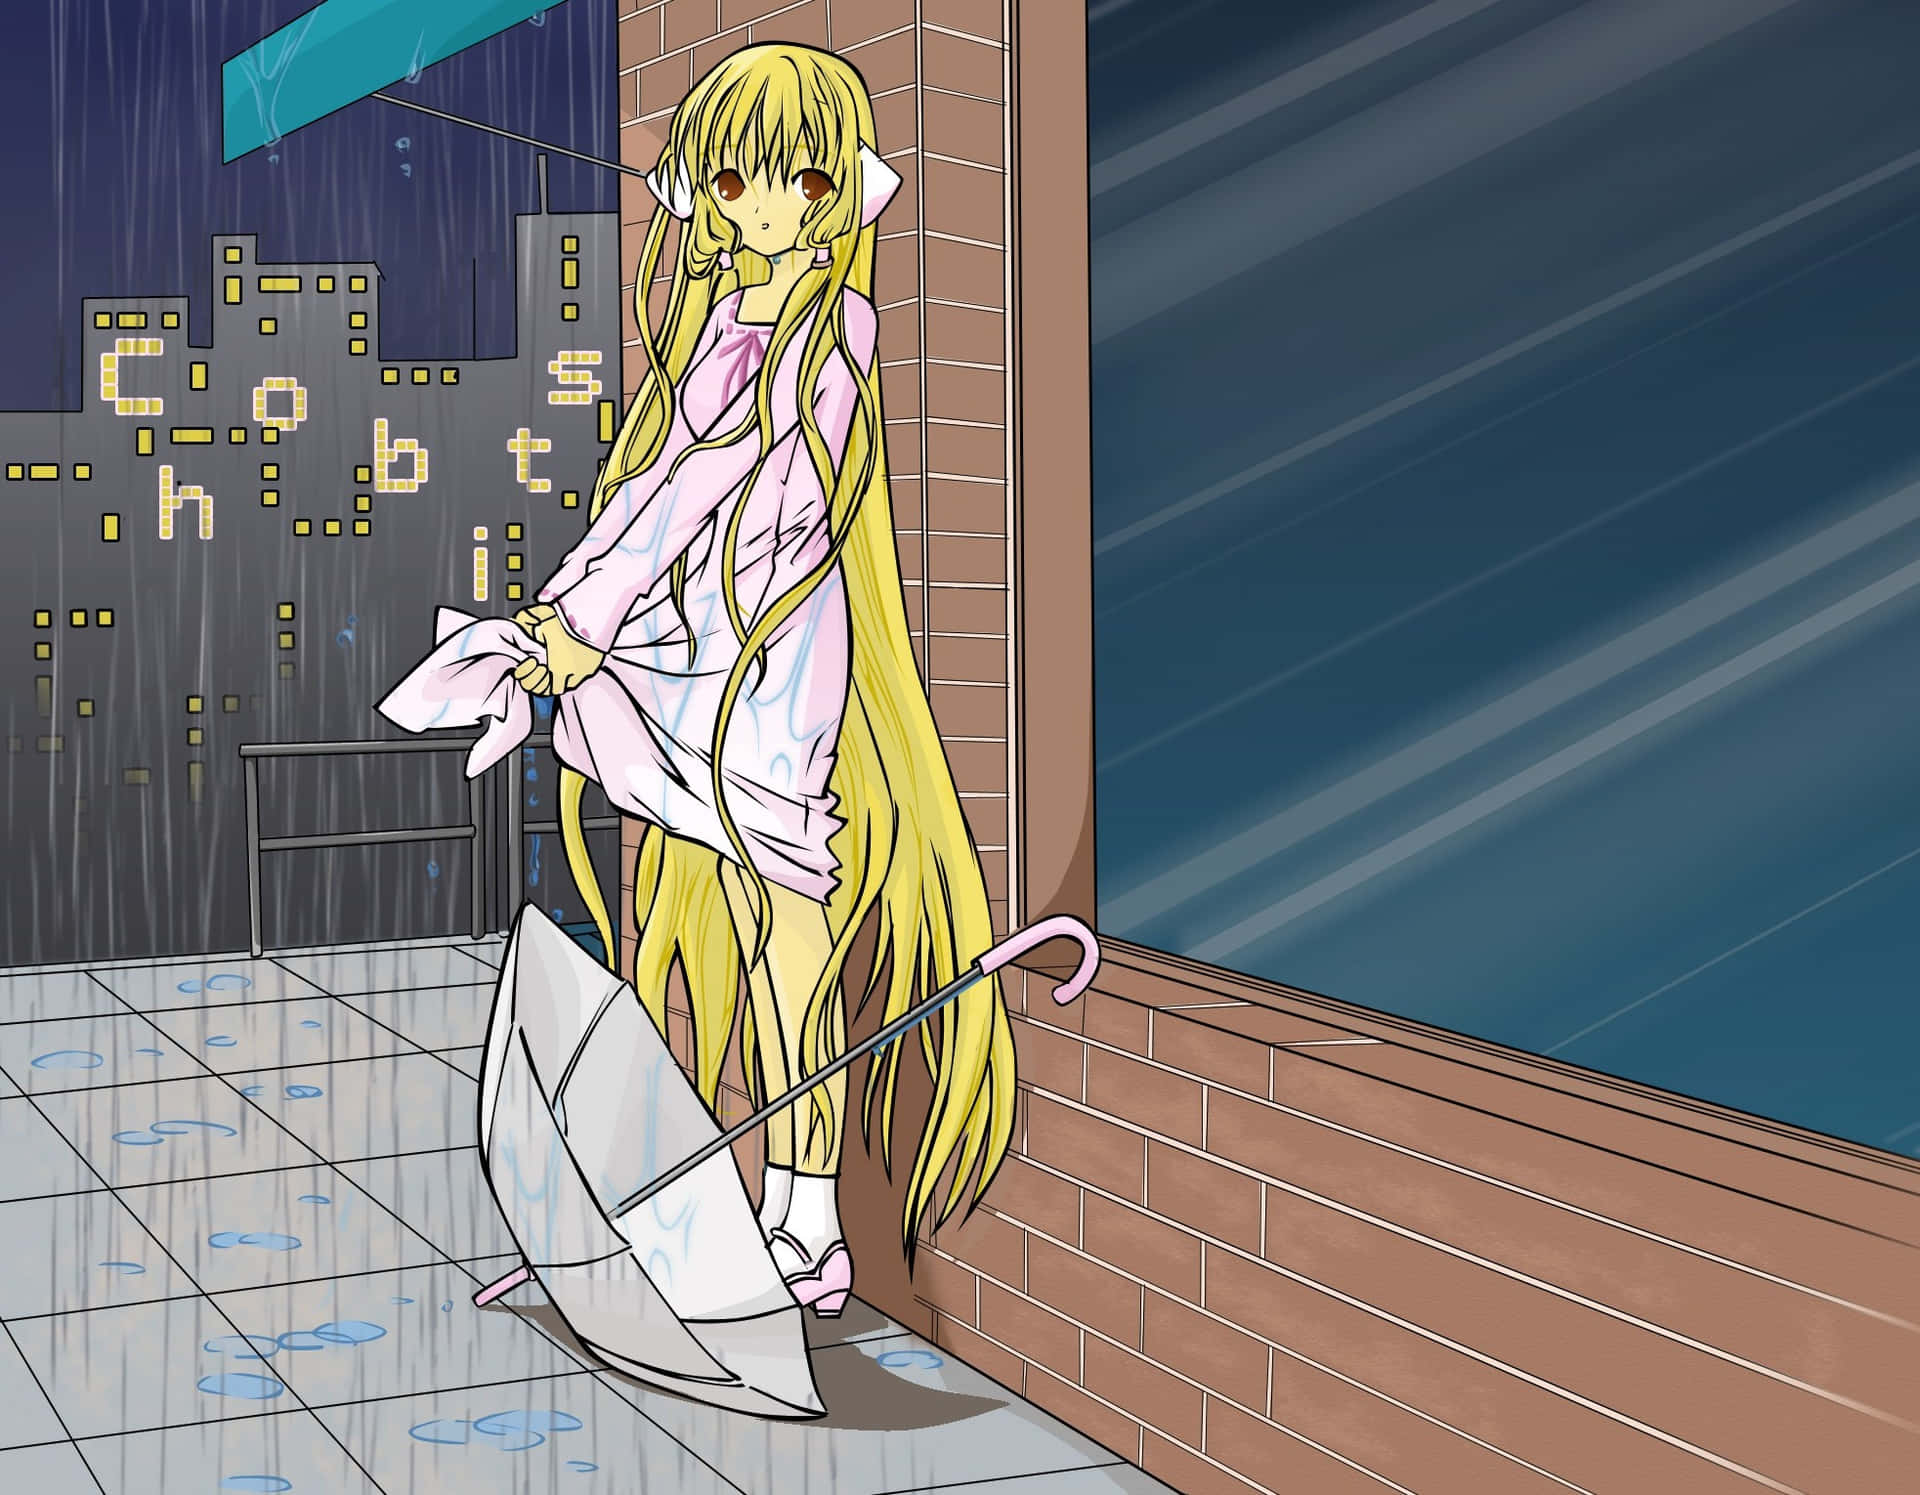 Chii From Chobits In A Beautiful Anime Scenery Wallpaper